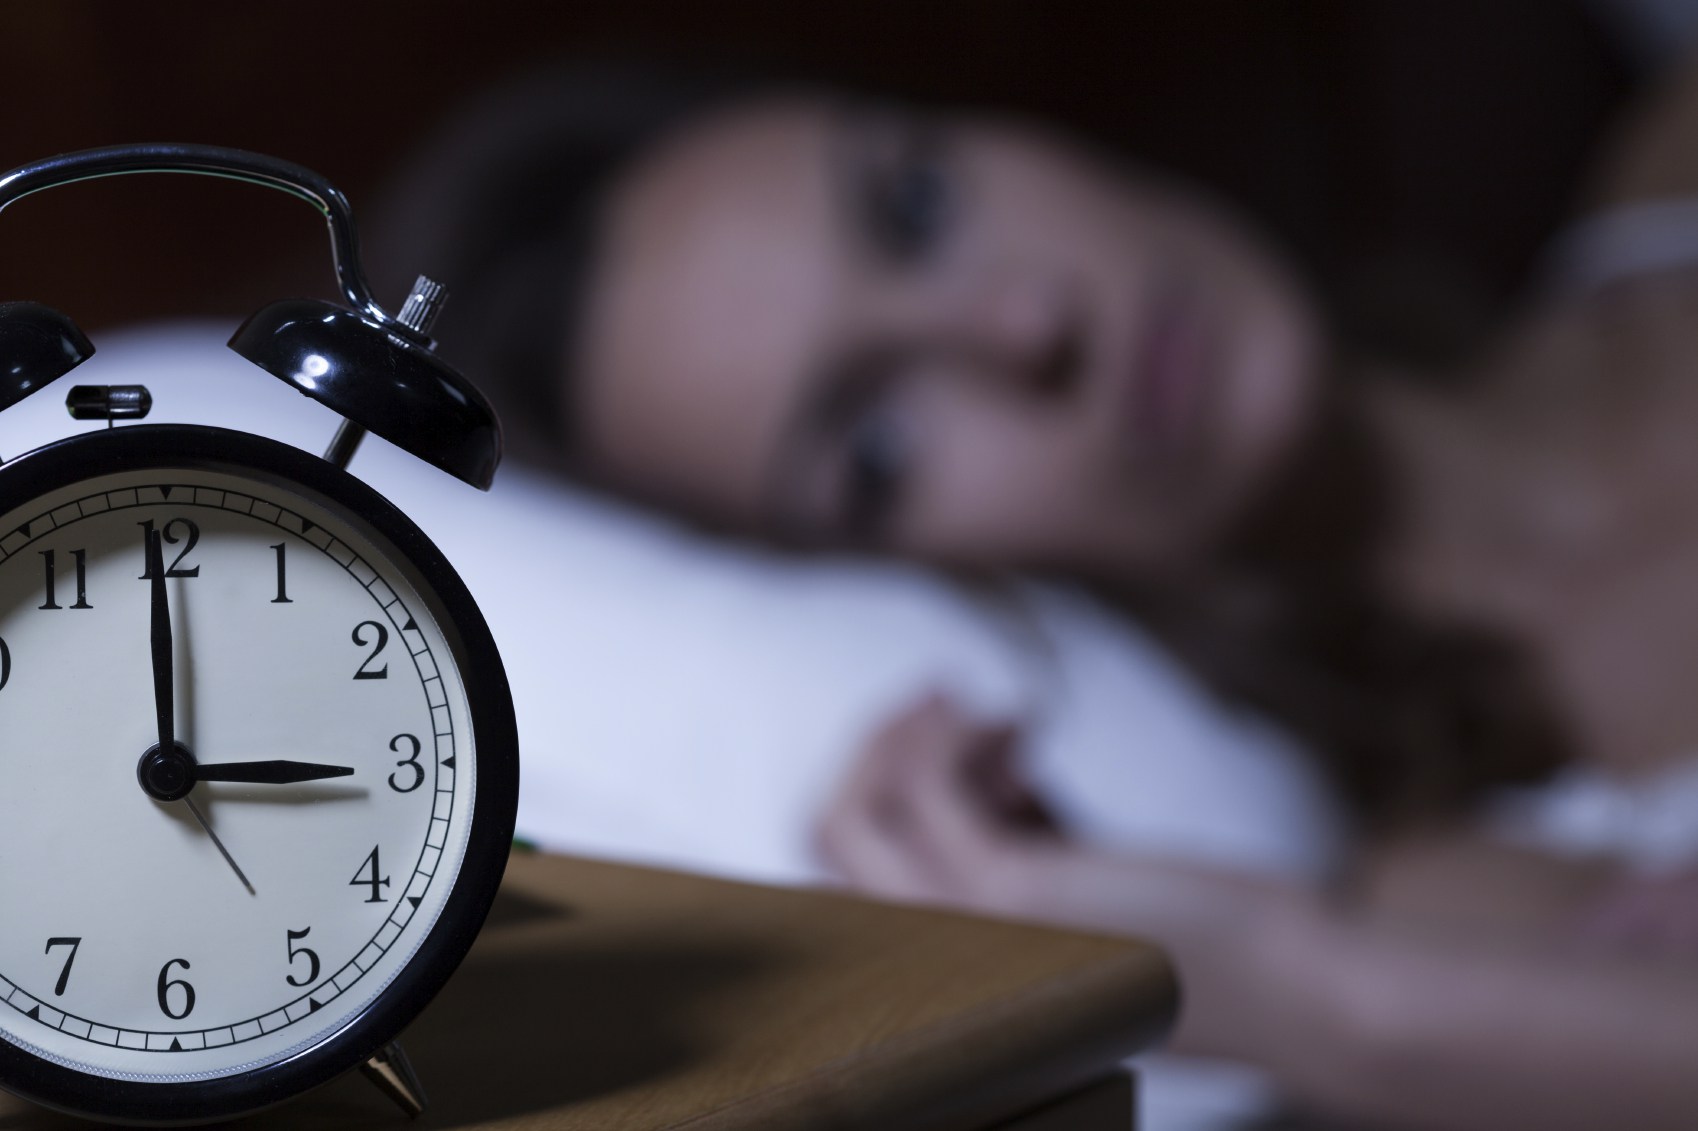 Diabetes and Sleep Problems, a Very Common Relationship